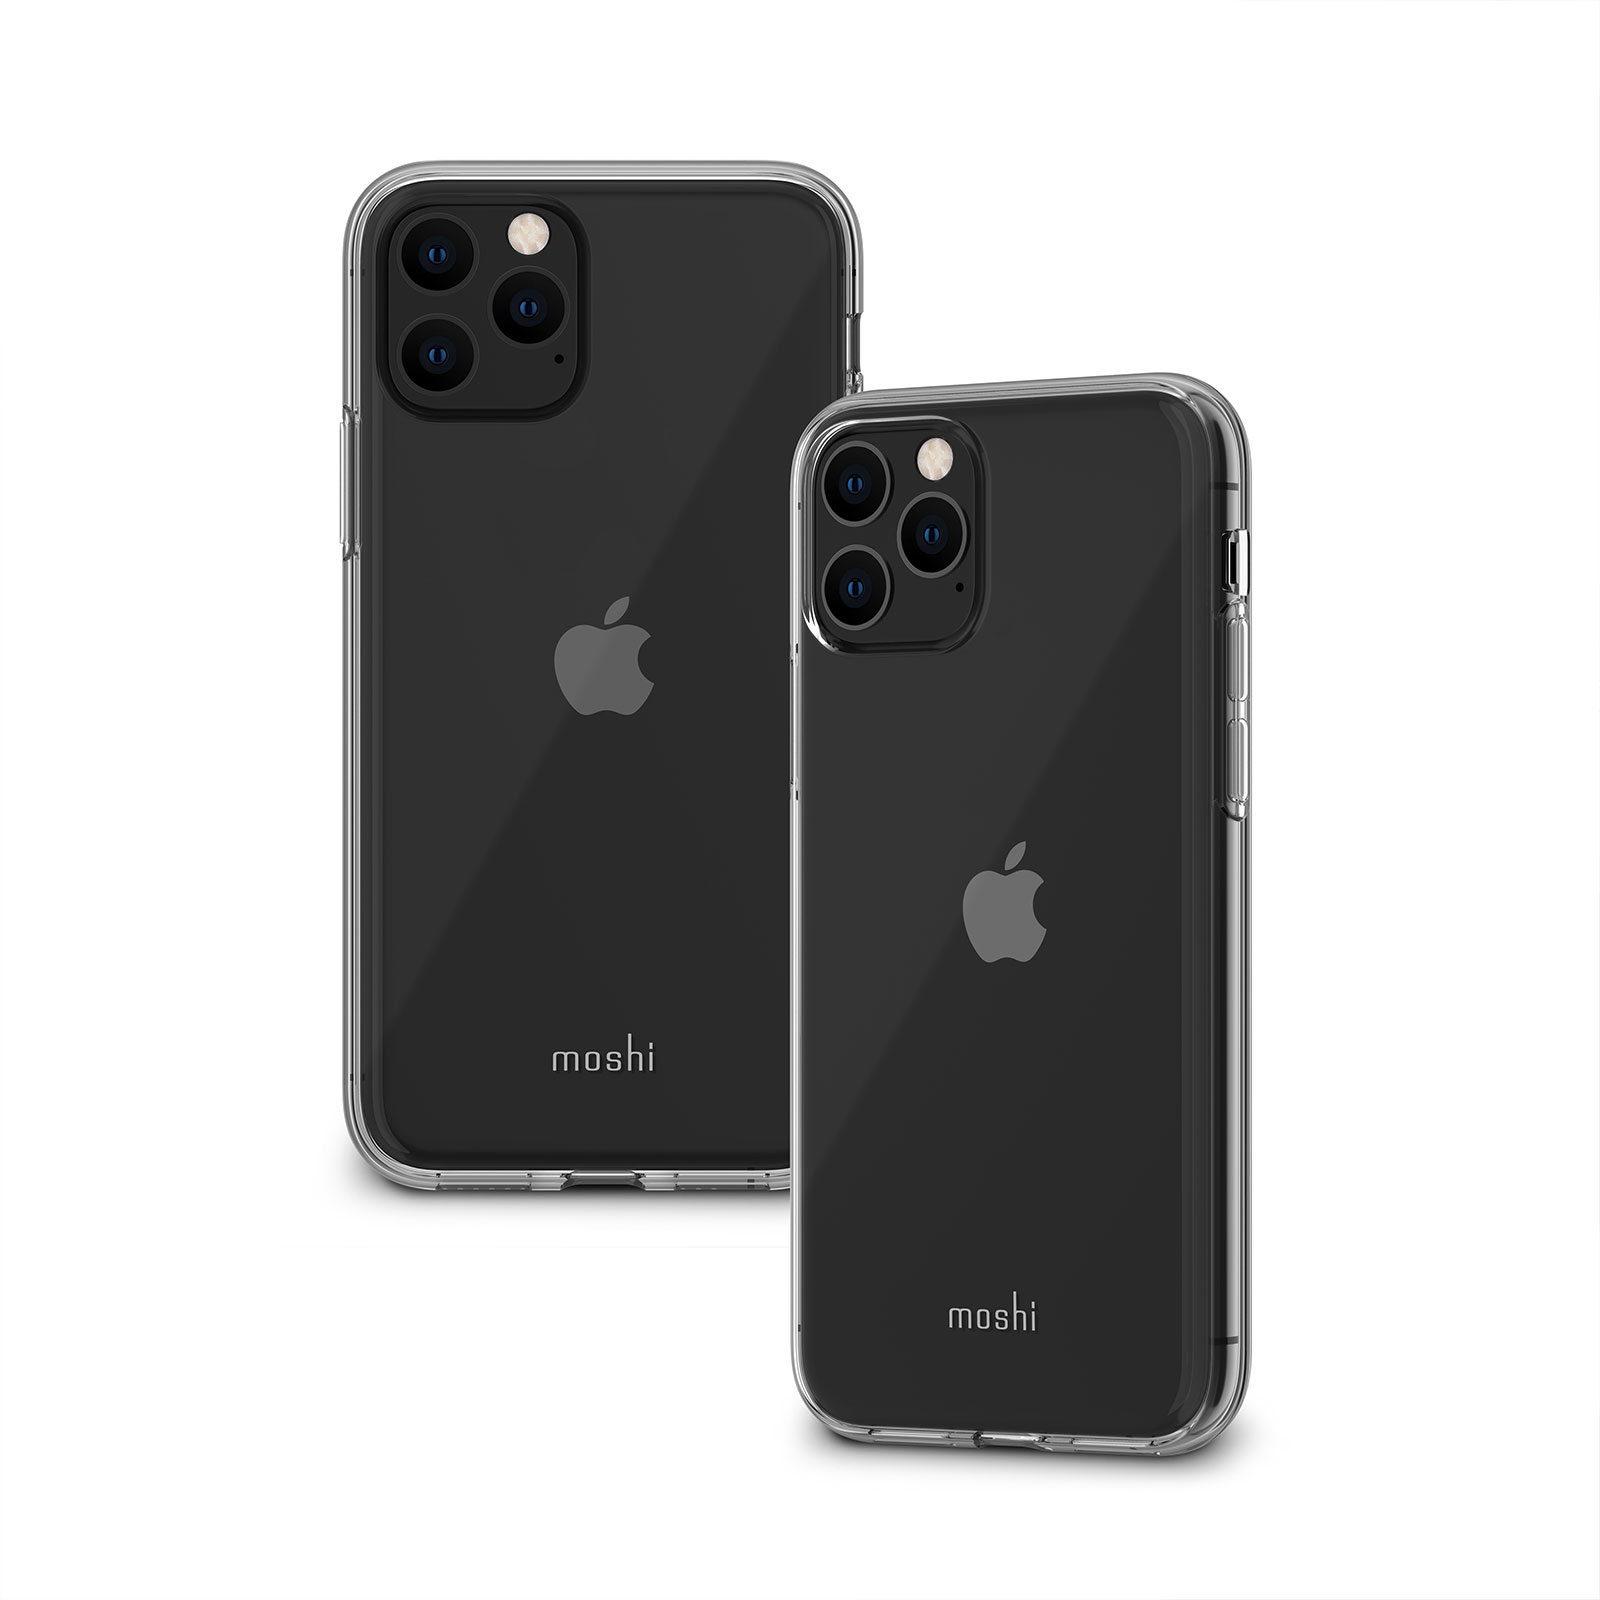 Moshi Vitros Crystal Clear Case for iPhone 11 Pro